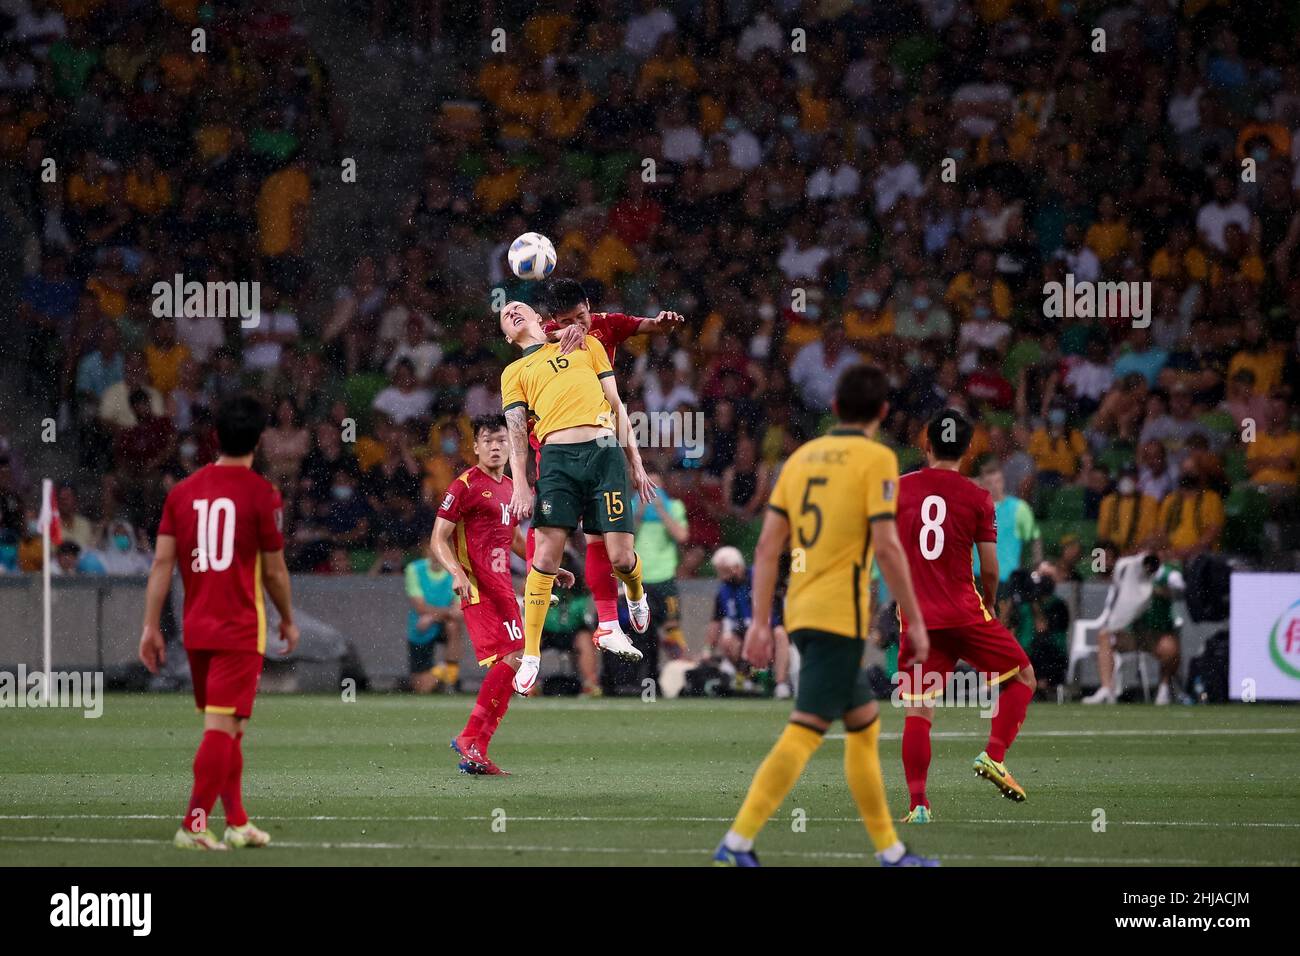 Melbourne, Australia, 27 January, 2022. Mitchell Duke of the Australian Socceroos heads the ball during the World Cup Qualifier football match between Australia Socceroos and Vietnam on January 27, 2022 at AAMI Park in Melbourne, Australia. Credit: Dave Hewison/Speed Media/Alamy Live News Stock Photo